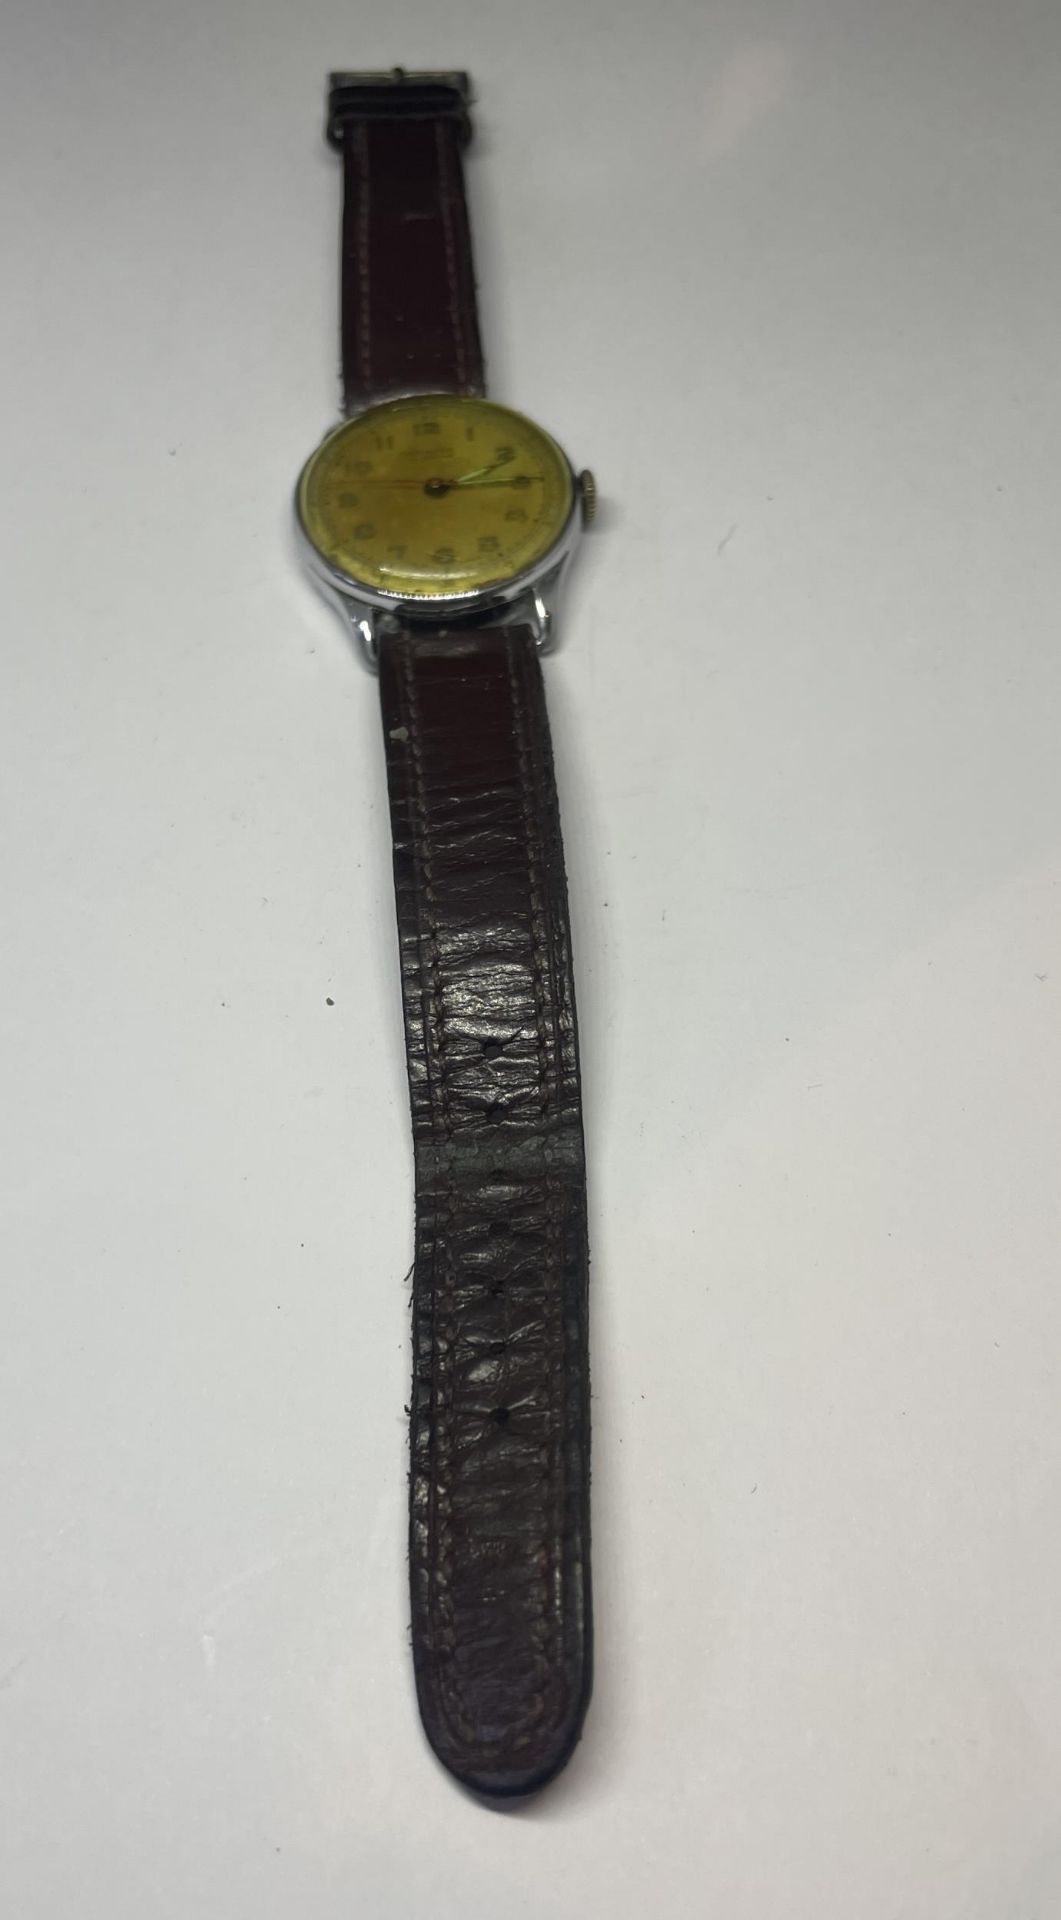 A MENTOR MILITARY STYLE GENTS WRIST WATCH, SEEN WORKING BUT NO WARRANTIES GIVEN - Image 2 of 4